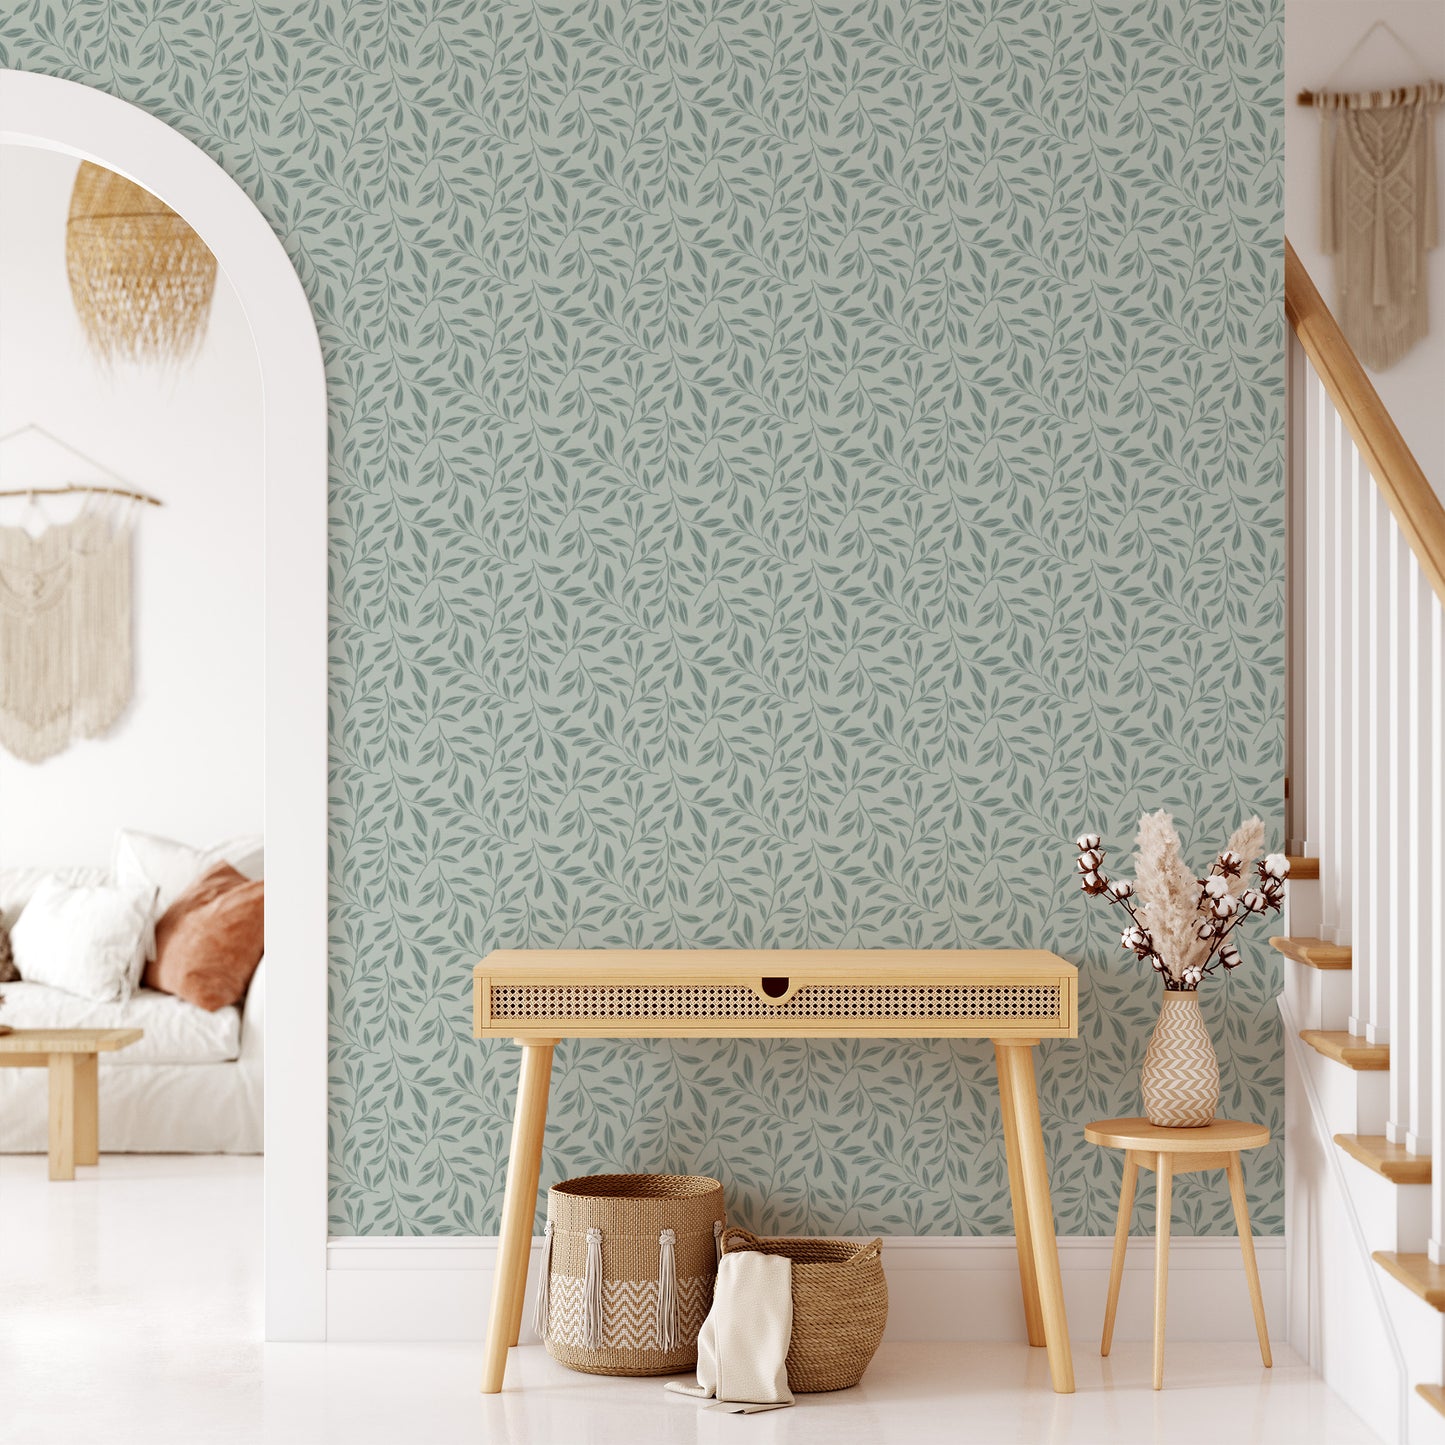 Bedroom featuring Cayla Naylor Willow-Sage Peel and Stick Wallpaper - a classic pattern